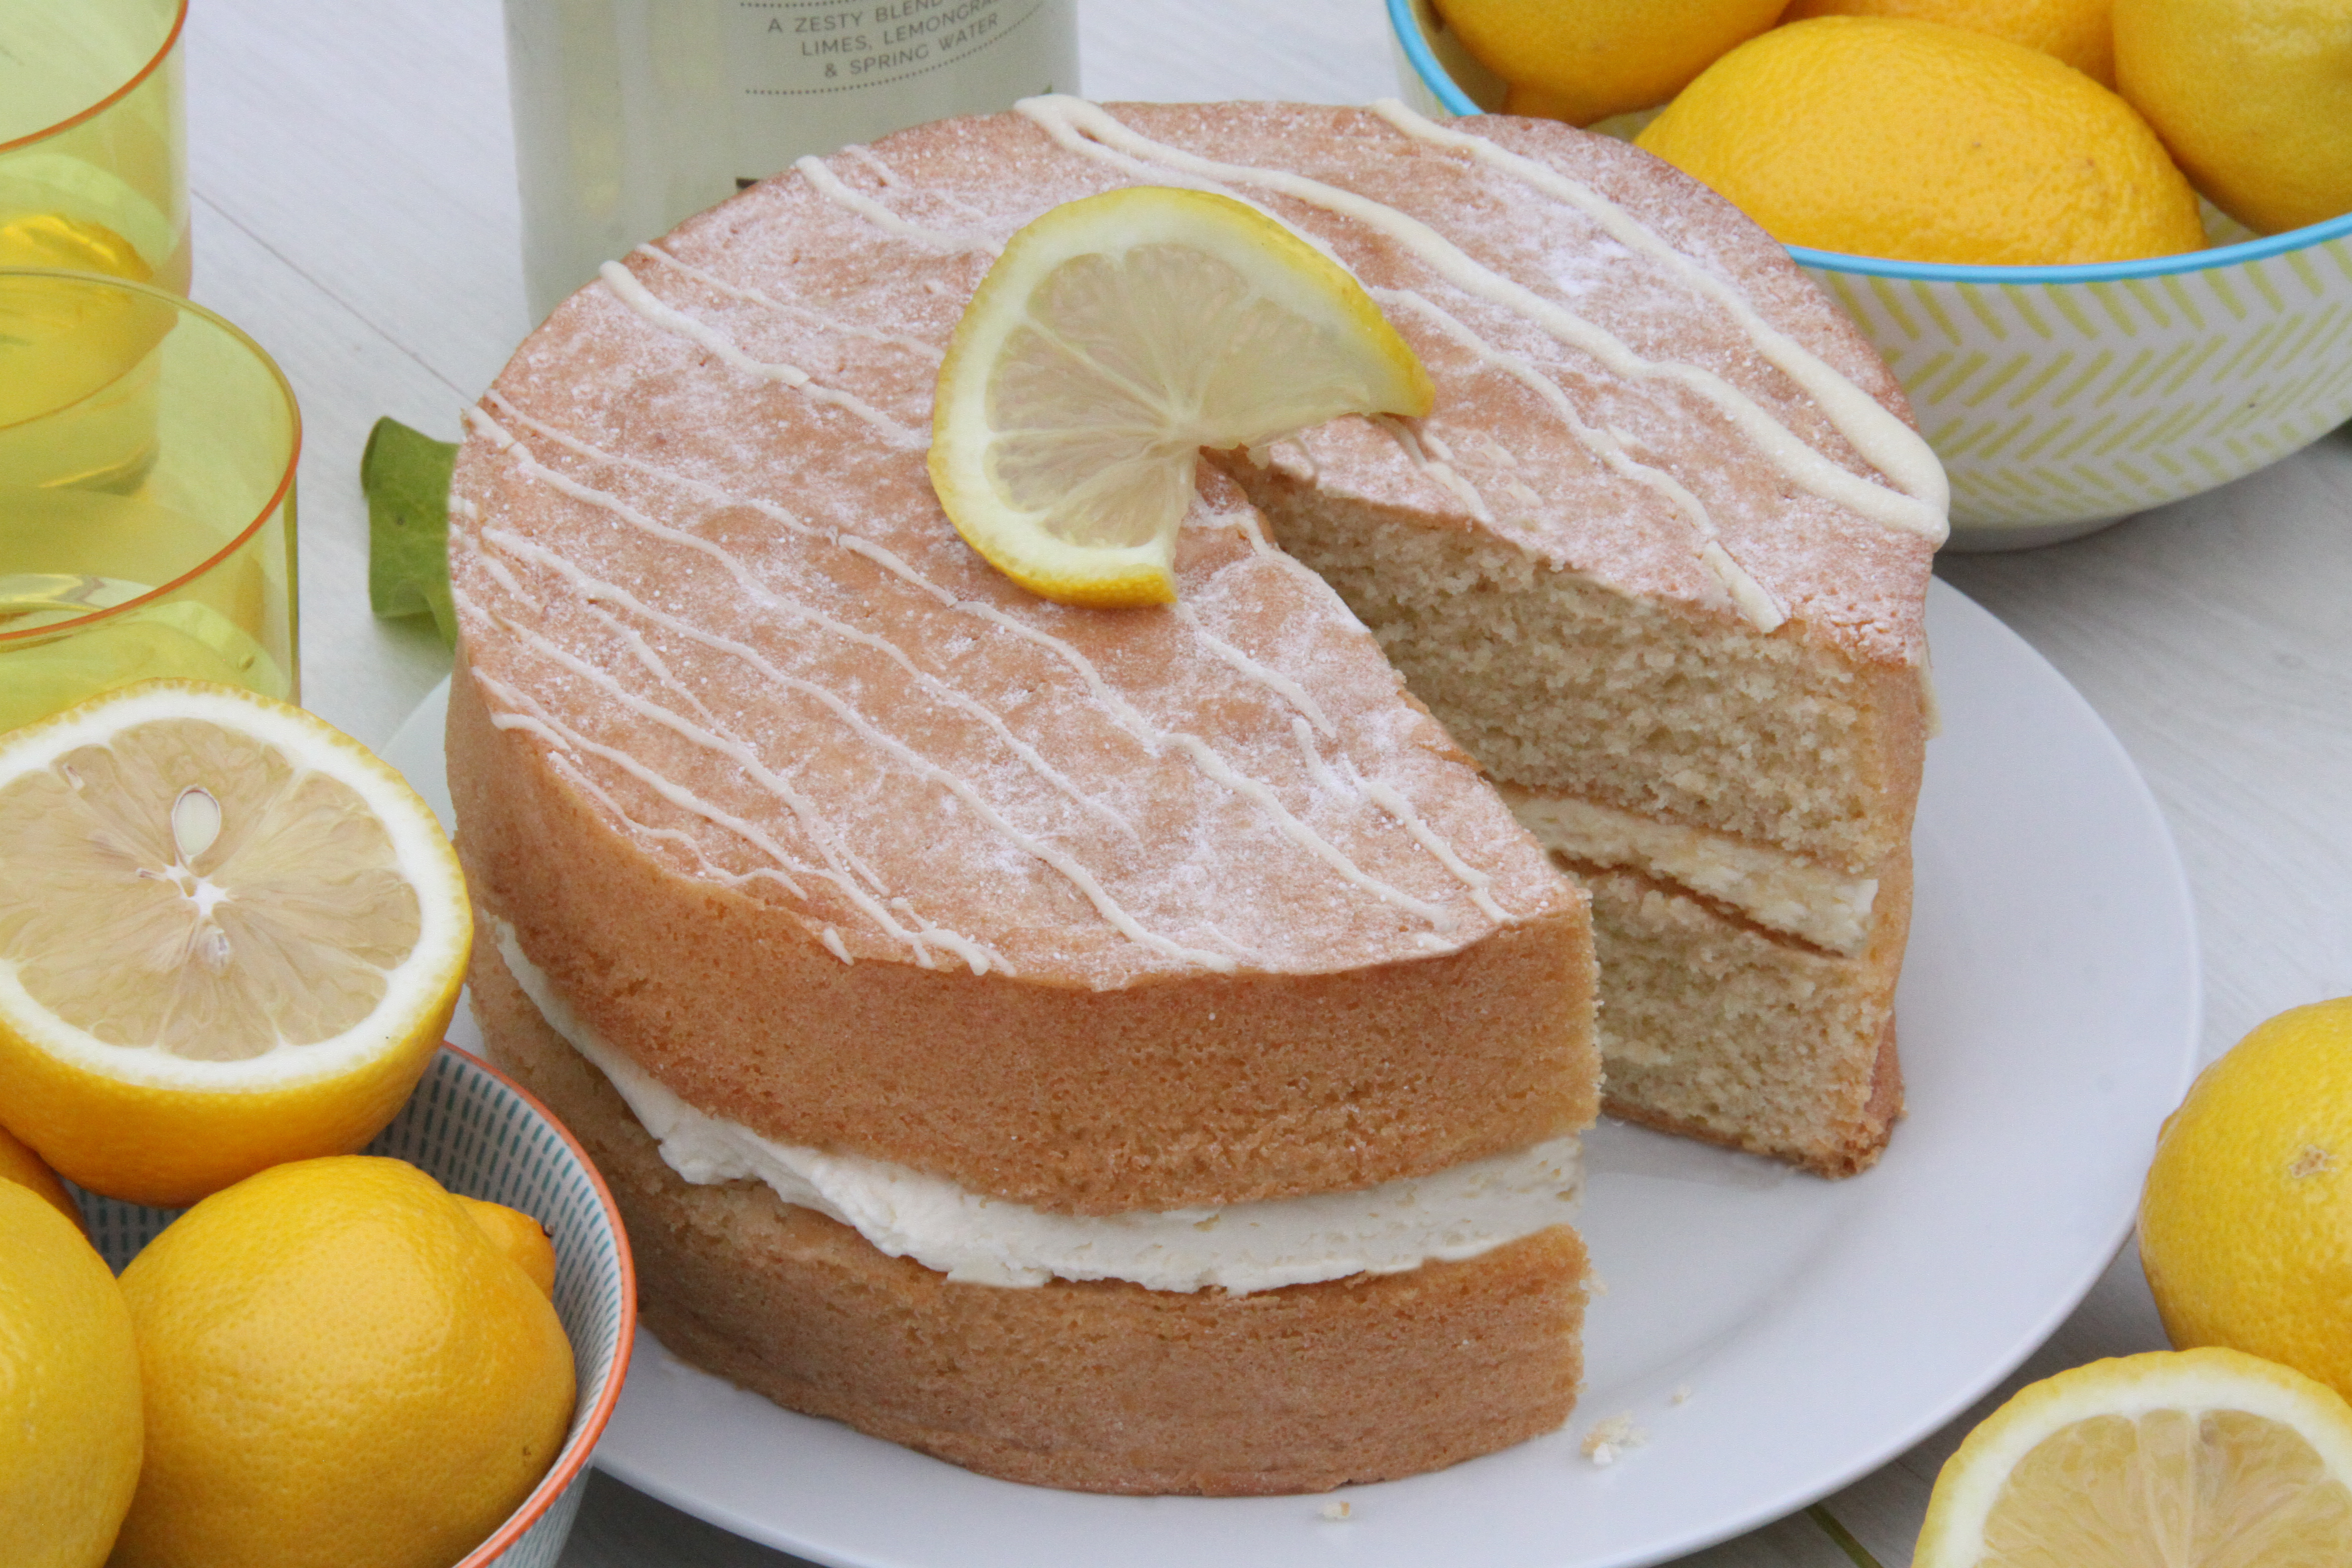 Celebrate the weekend with a SPONGE Friday! Order by Thursday 2pm for delivery on Friday! £9.99 for Lemon Sponge Friday!